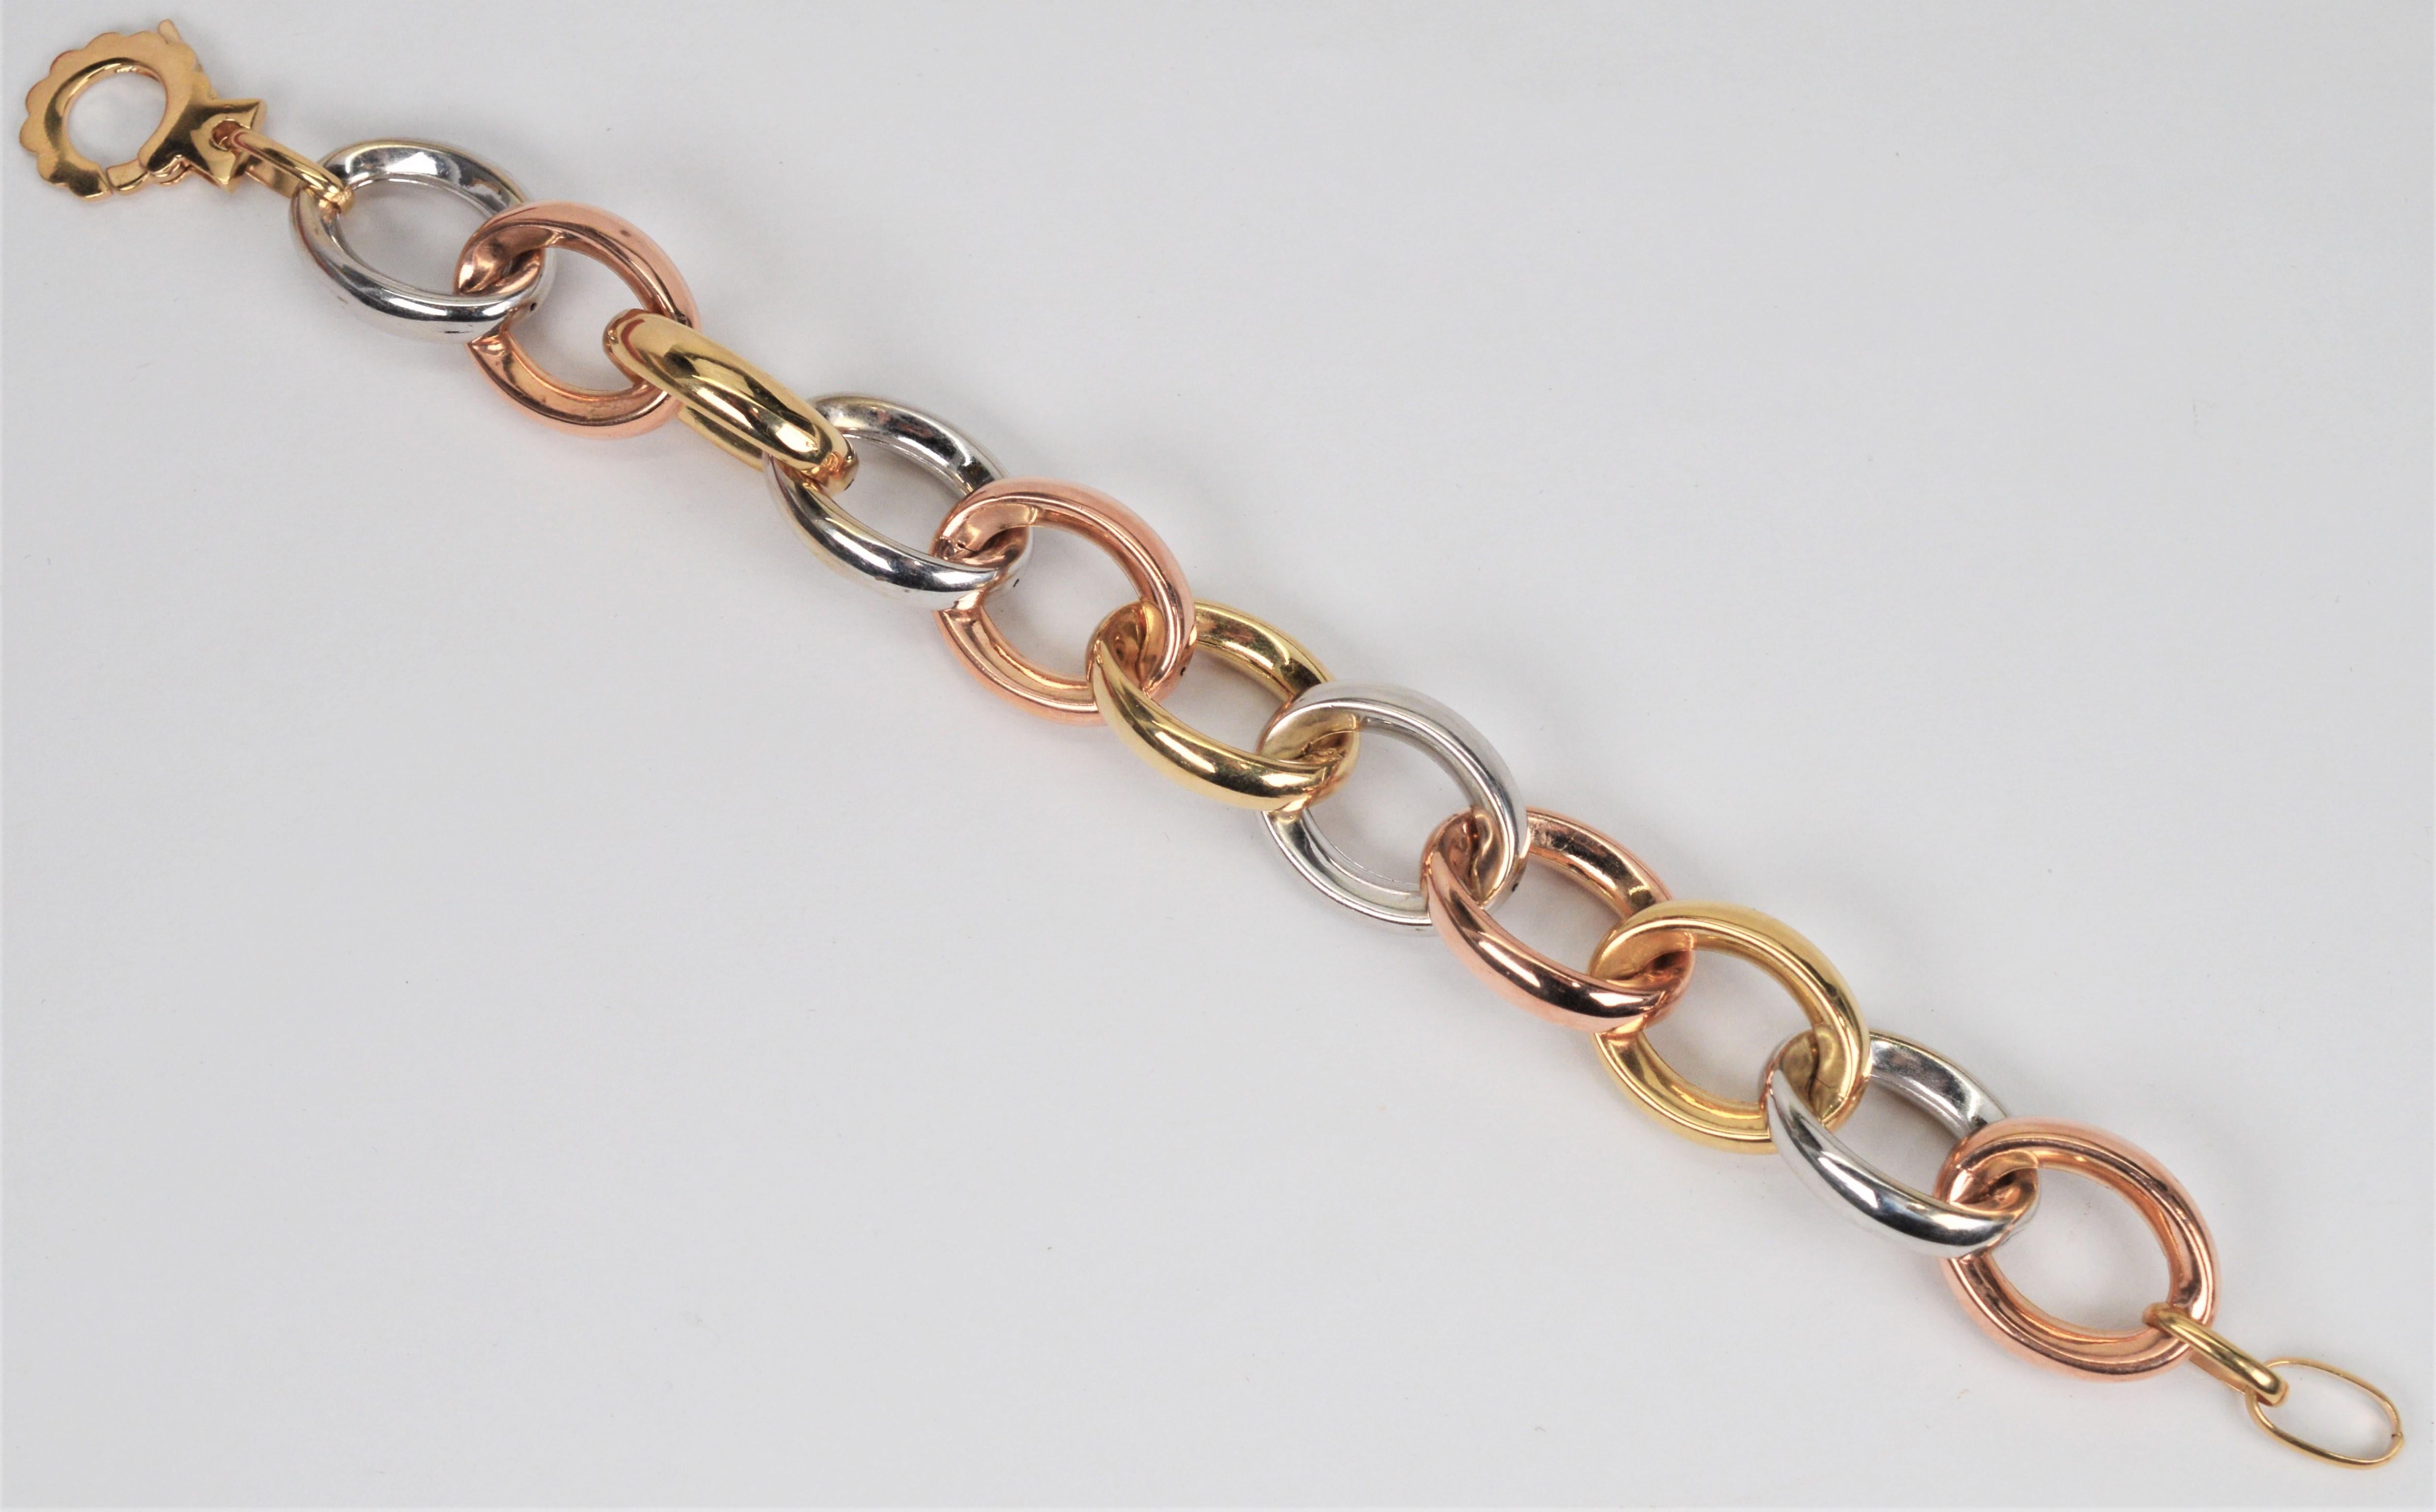 A bright and colorful triad of bold fourteen karat gold oval chain links create this classic retro style bracelet. Quality Italian made, interlocking hollow links of white, yellow and rose gold finished with a decorative, easy-on jumbo spring ring